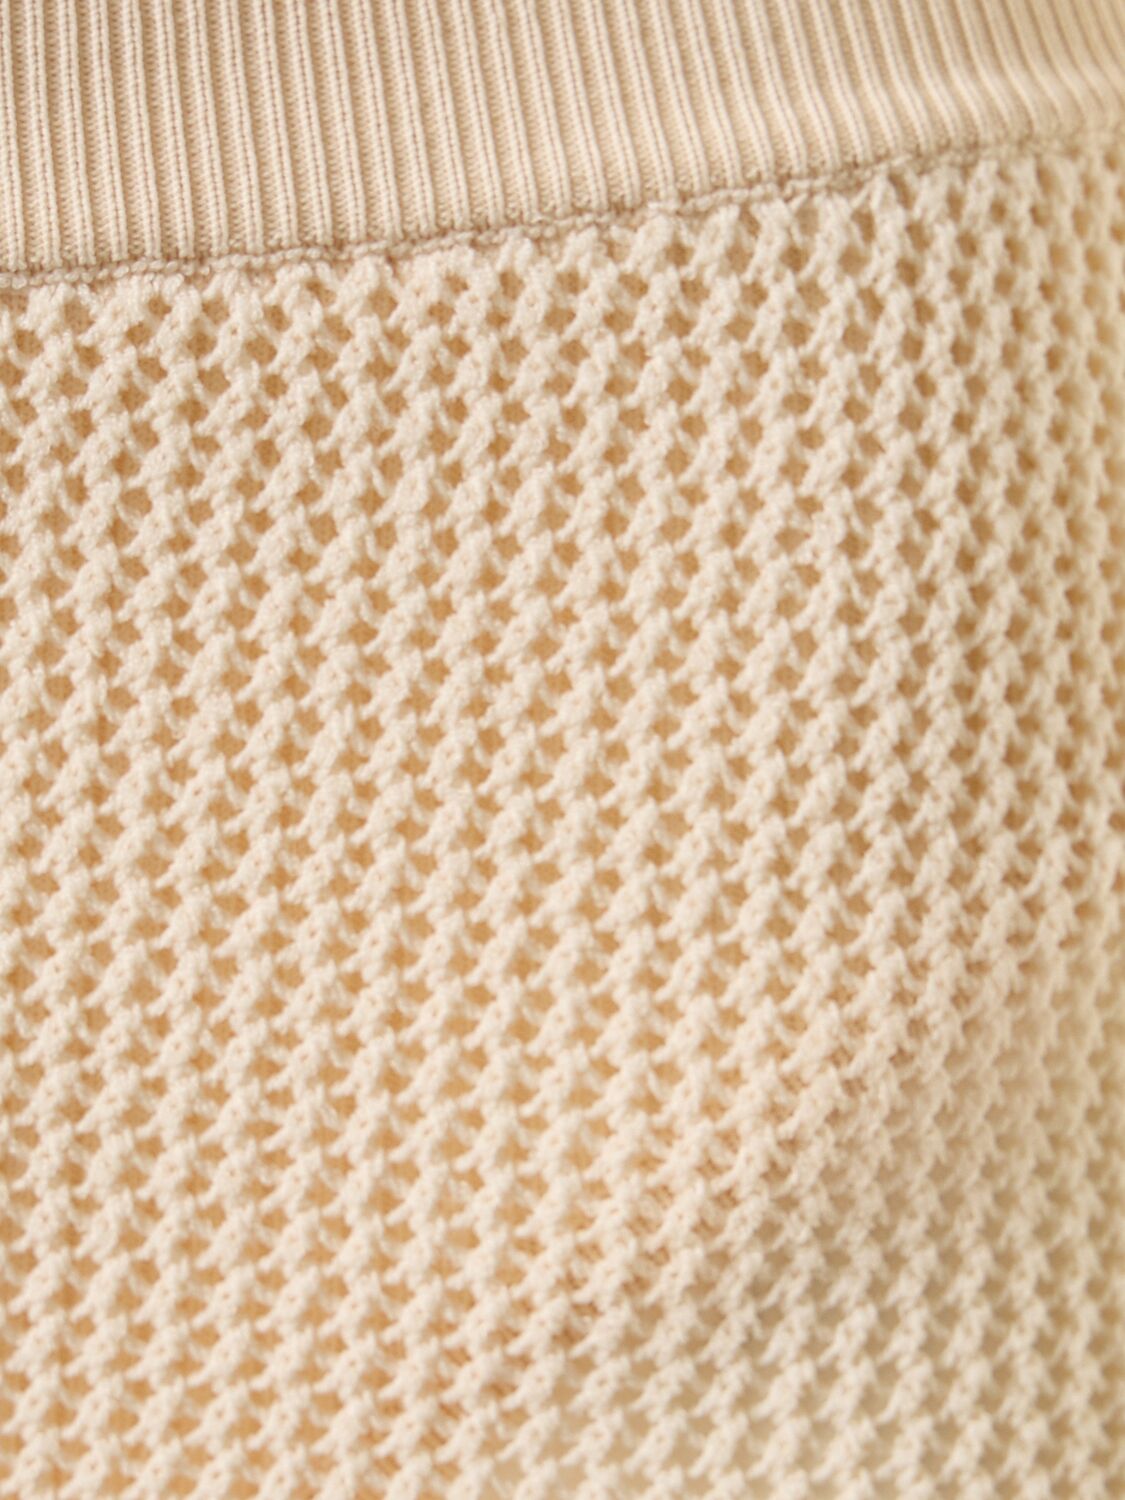 Shop Live The Process Nyx Knitted High Waist Shorts In Beige